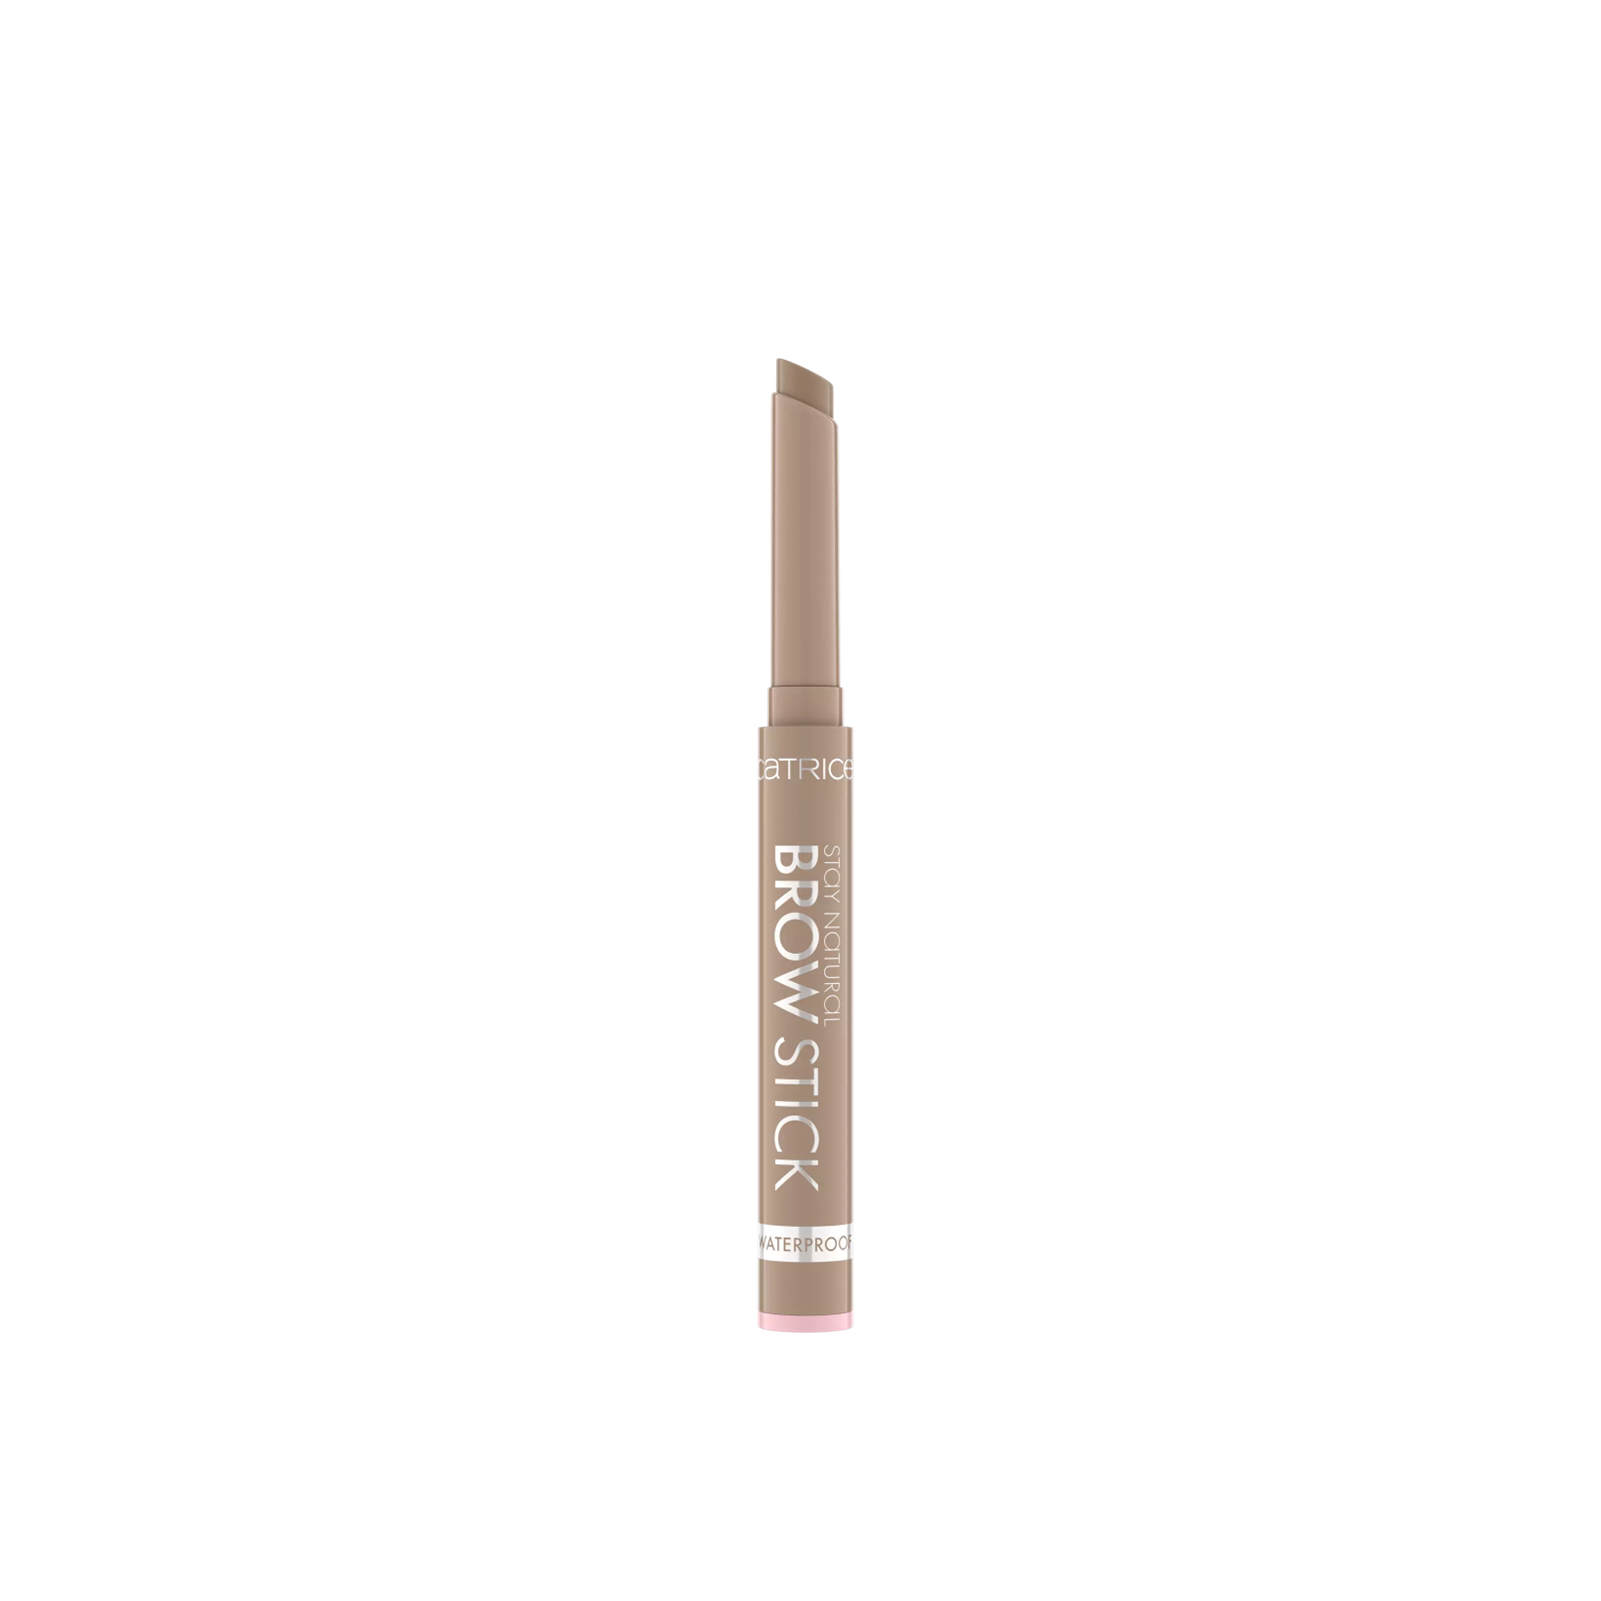 Medium Soft Brow Catrice oz) Brown 1g 020 USA · Natural Buy Stay (0.03 Stick Waterproof